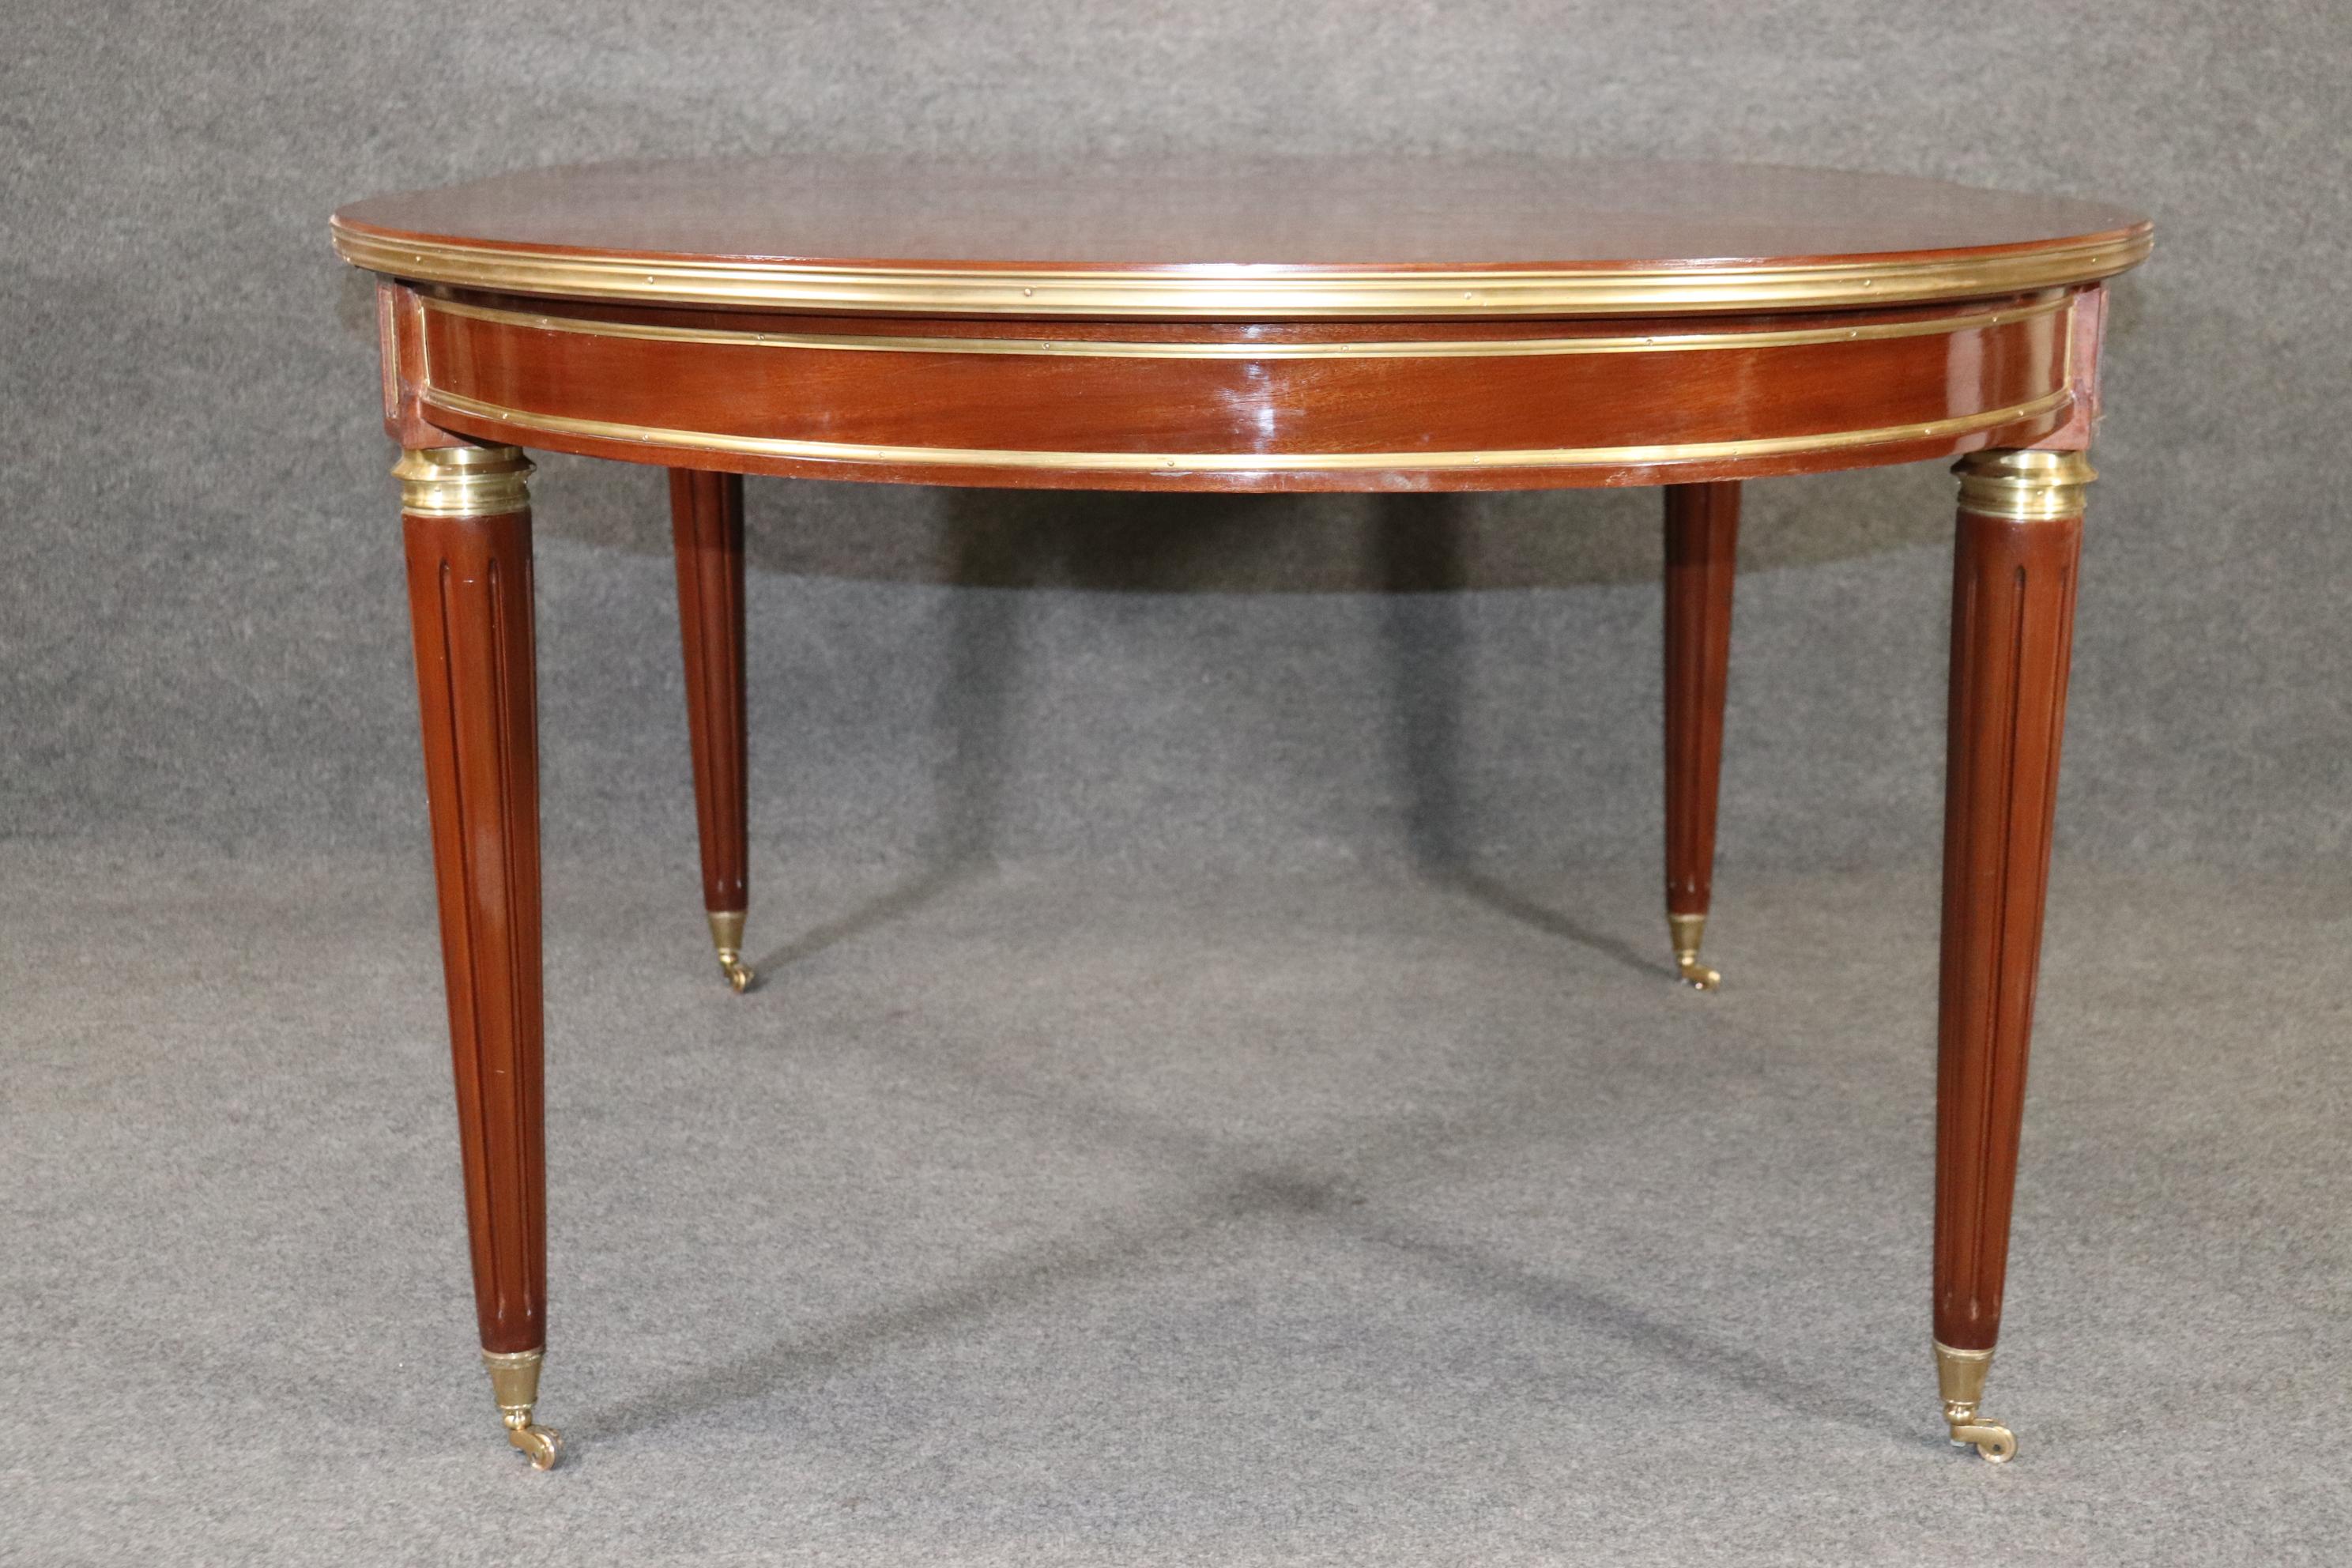 French Superb Brass Trimmed Maison Jansen Style Mahogany Dining Table with 3 Leaves